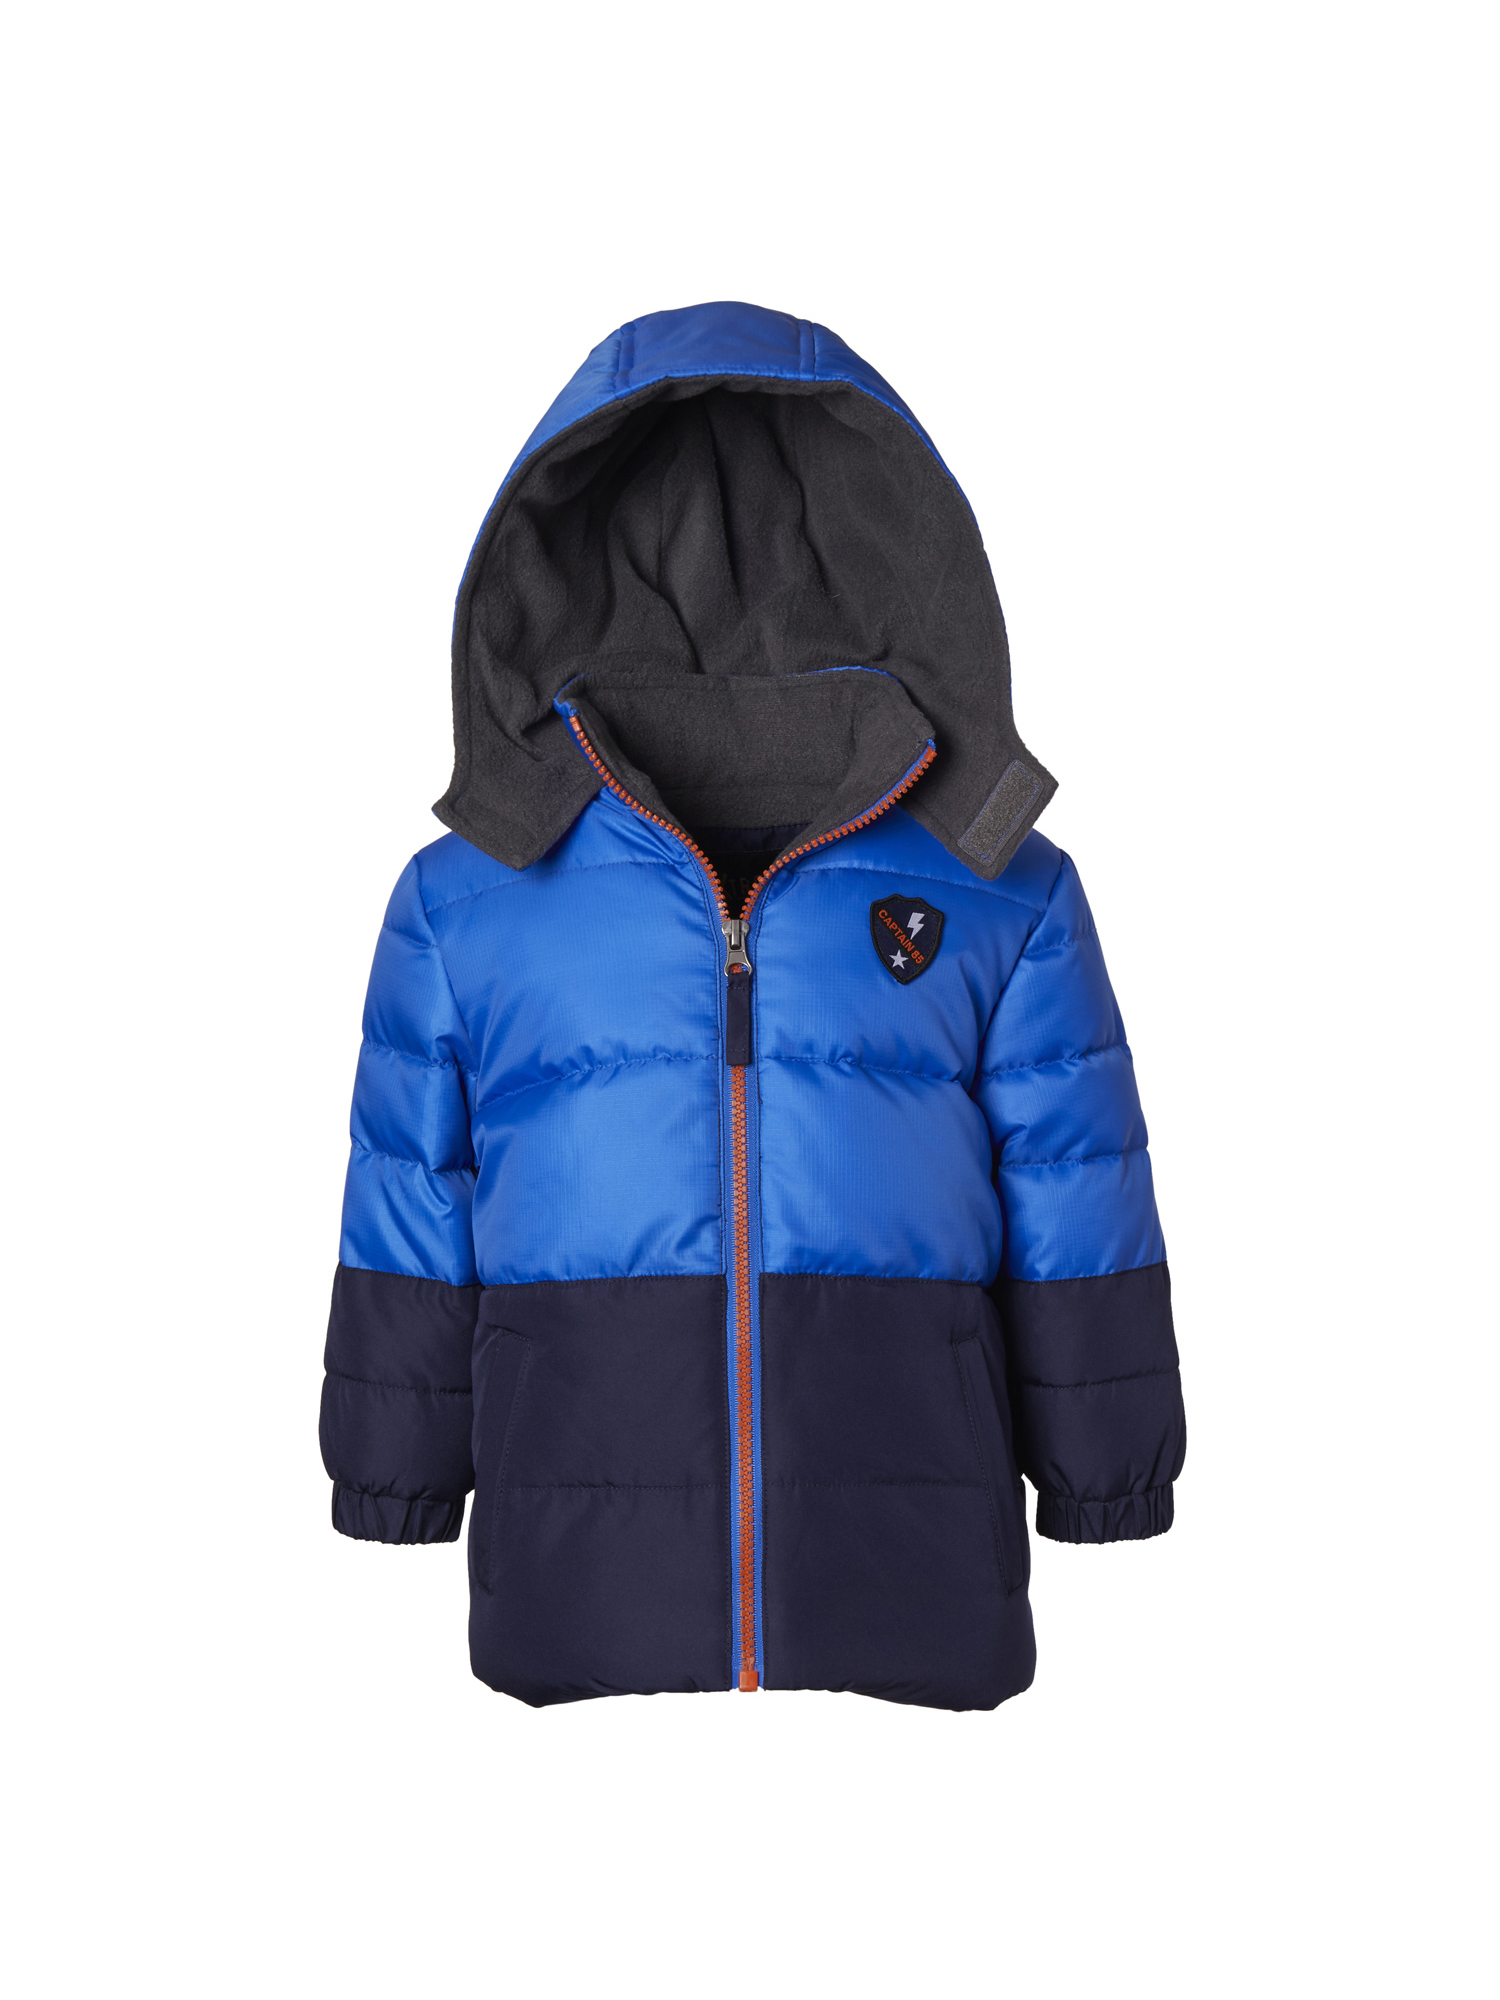 iXtreme Colorblock Puffer Jacket with Front Patch (Little Boys & Big Boys) - image 2 of 2